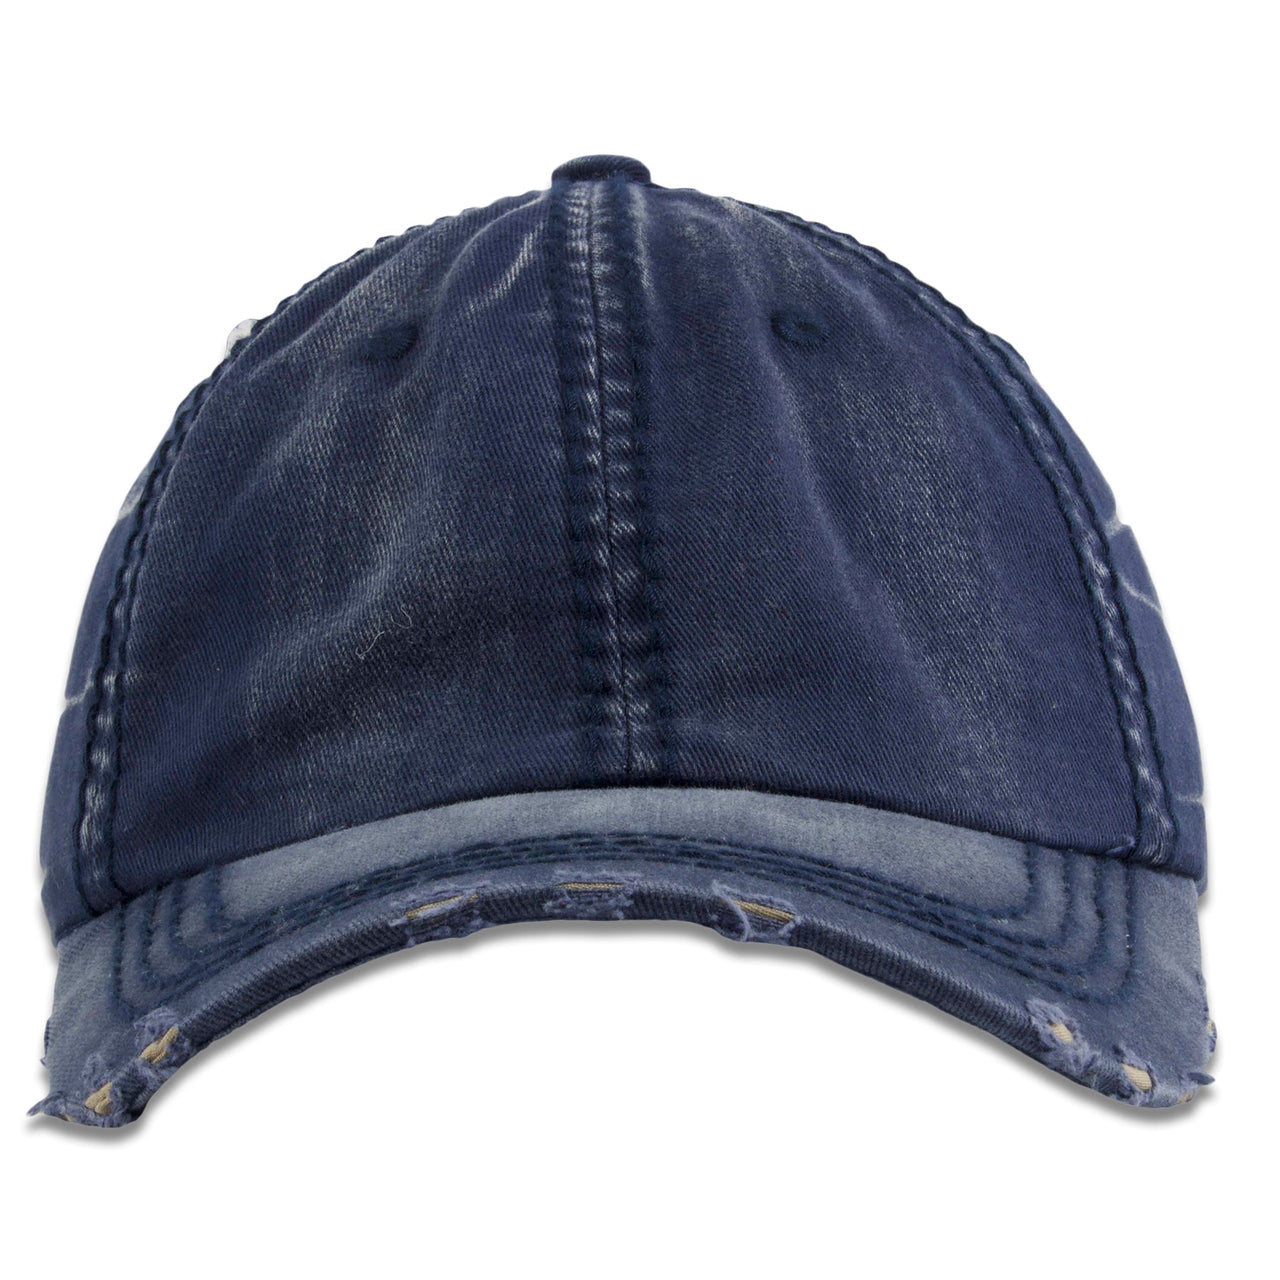 the navy blue vintage distressed baseball cap has a soft navy blue crown, a bent brim, and ripped ends